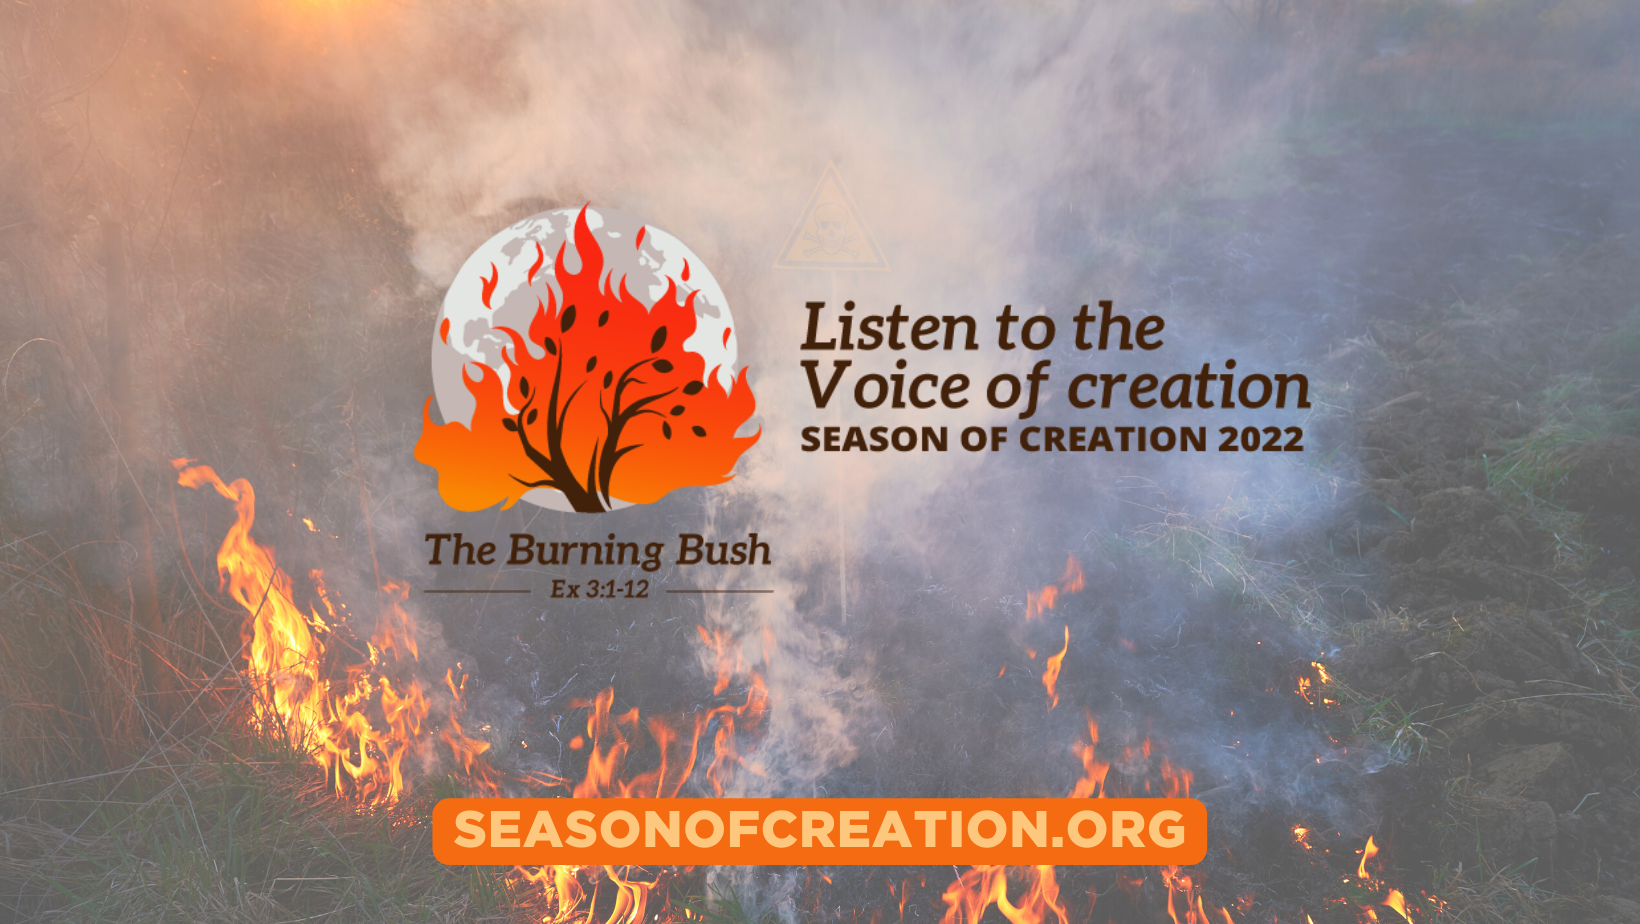 Gearing up for Season of Creation 2022 Laudato Si' Movement